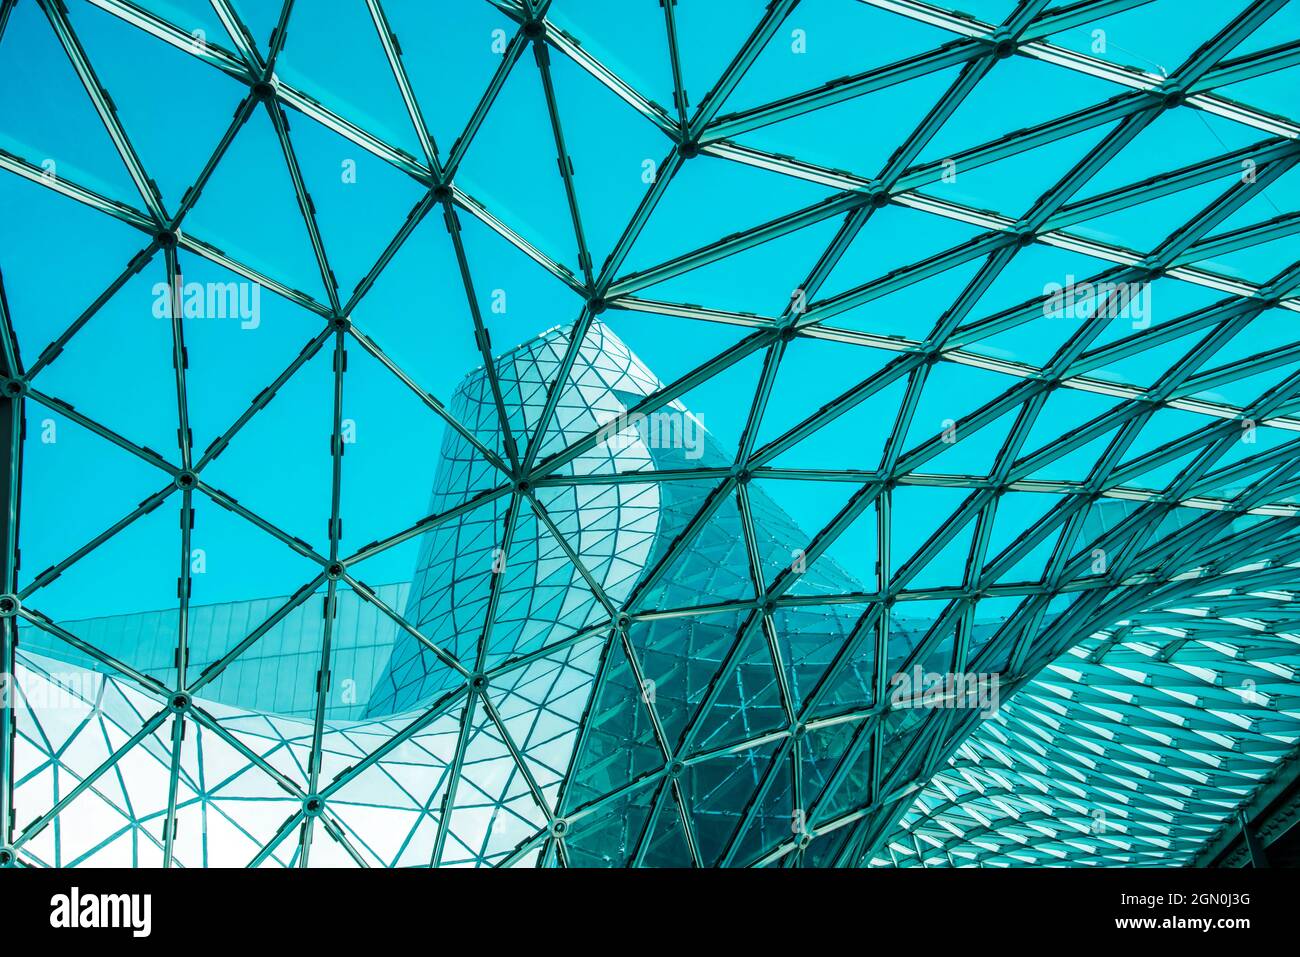 Low angle of curved glass roof with geometric shapes of modern building designed in futuristic style Stock Photo